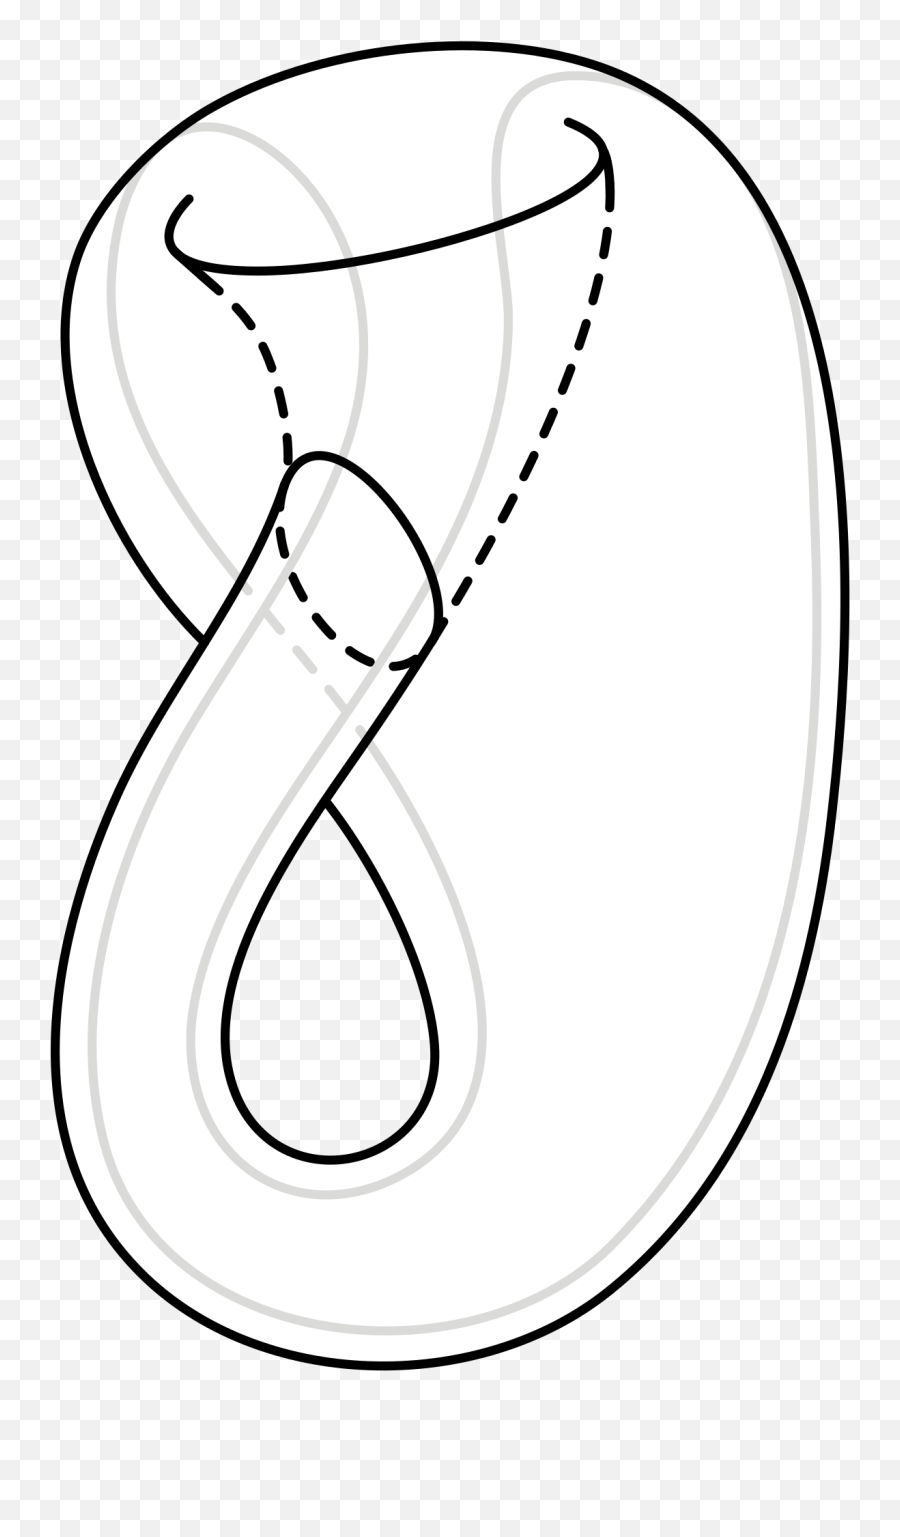 Will The Mohole Be Around In Ksp 2 - Ksp 2 Discussion Klein Bottle Emoji,Dabbing Emoji Copy And Paste